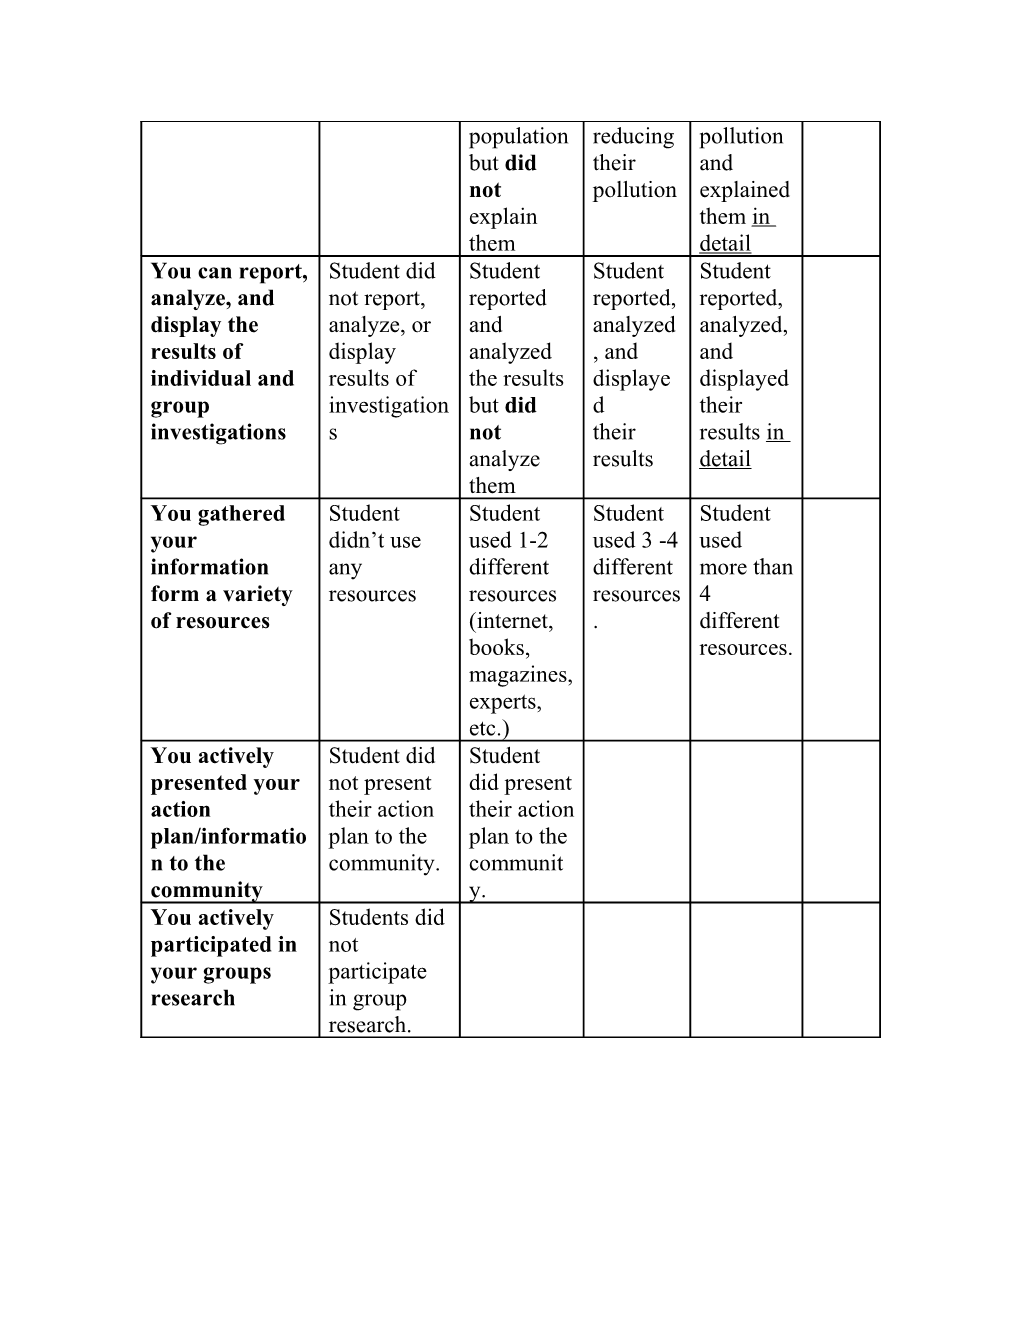 Rubric for Pollution Engaged Learning Project